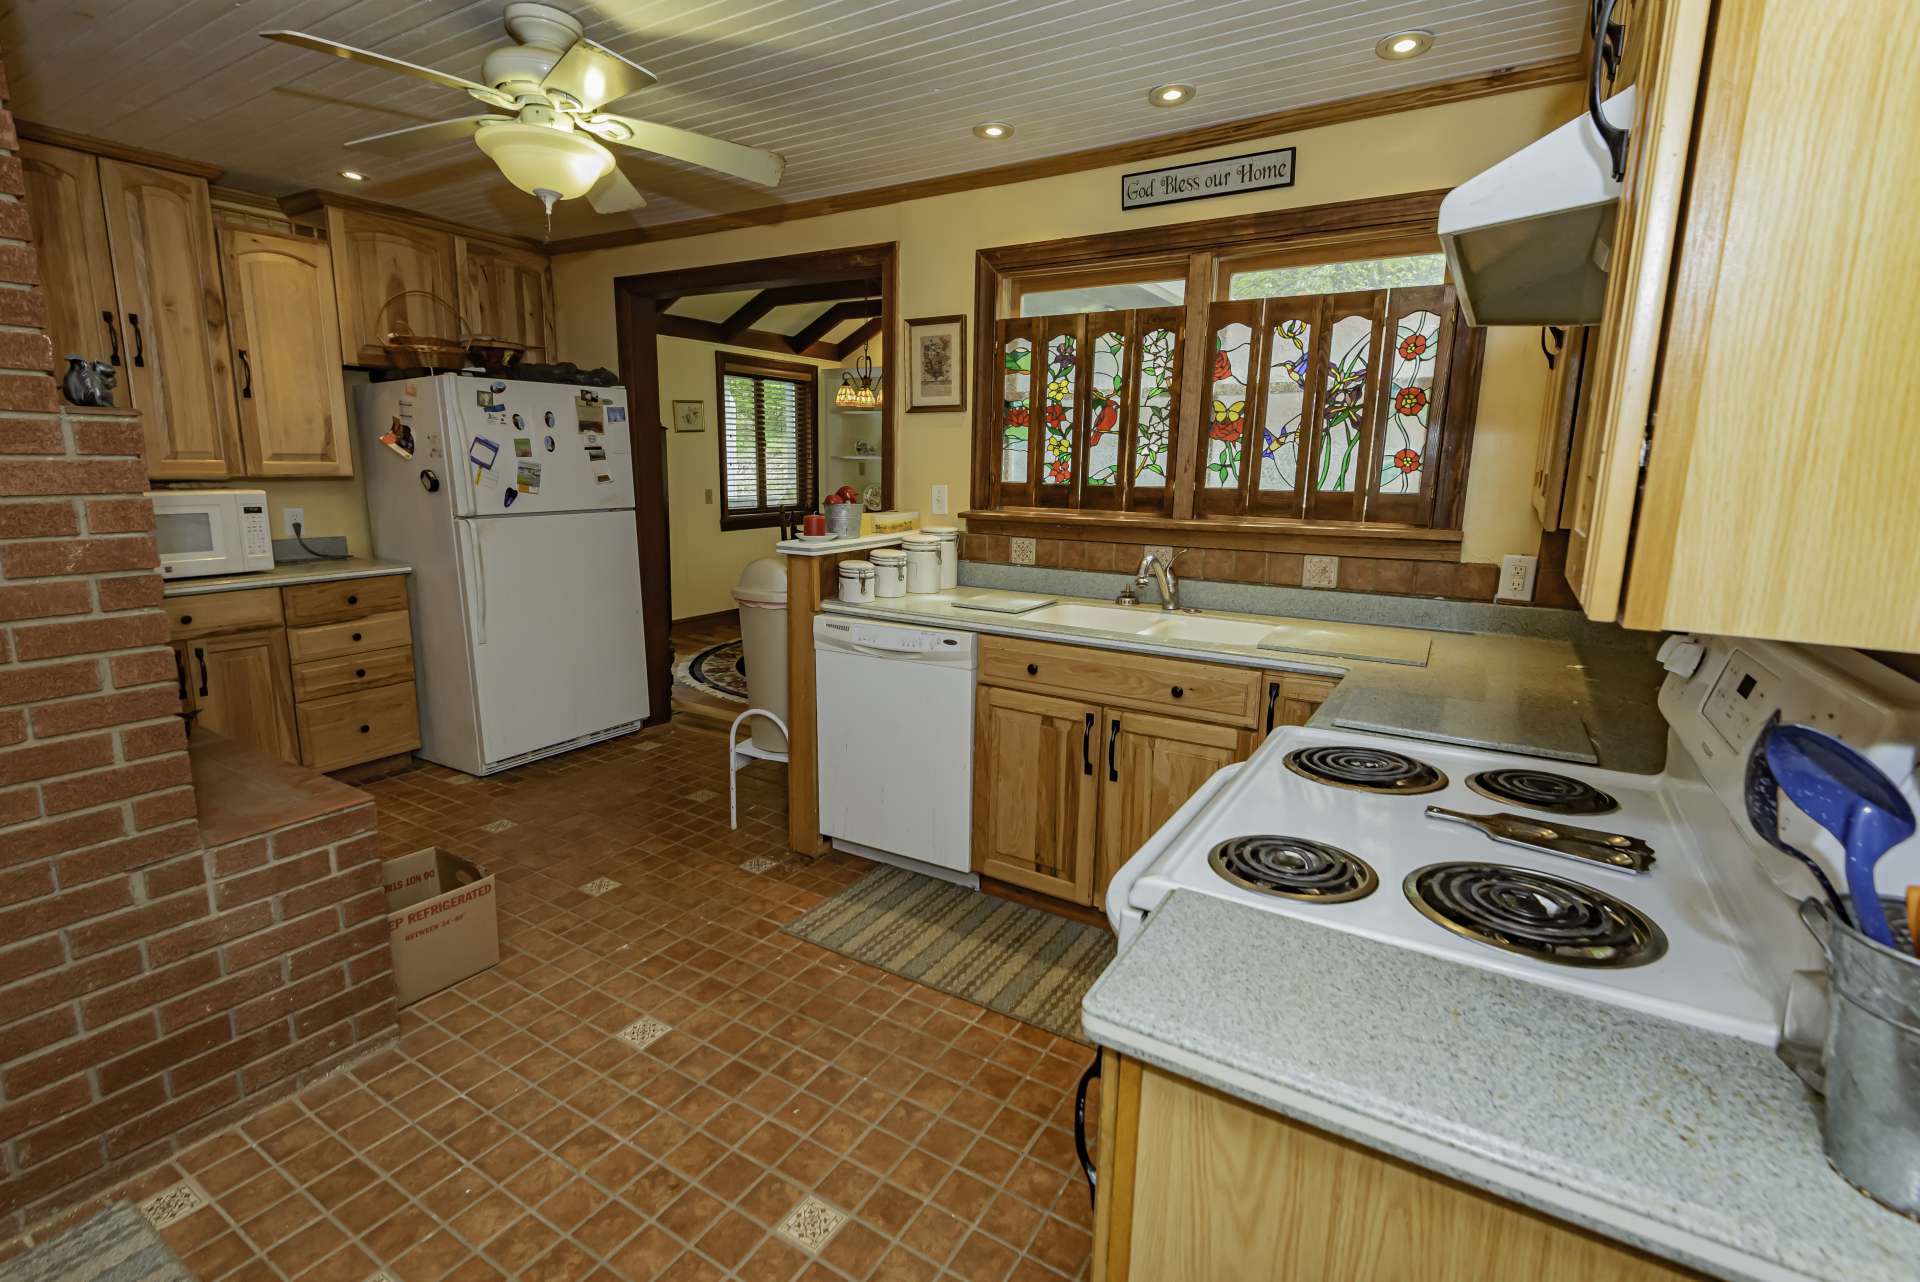 The kitchen offers plenty of work and storage space. Notice the lovely stained glass accents.